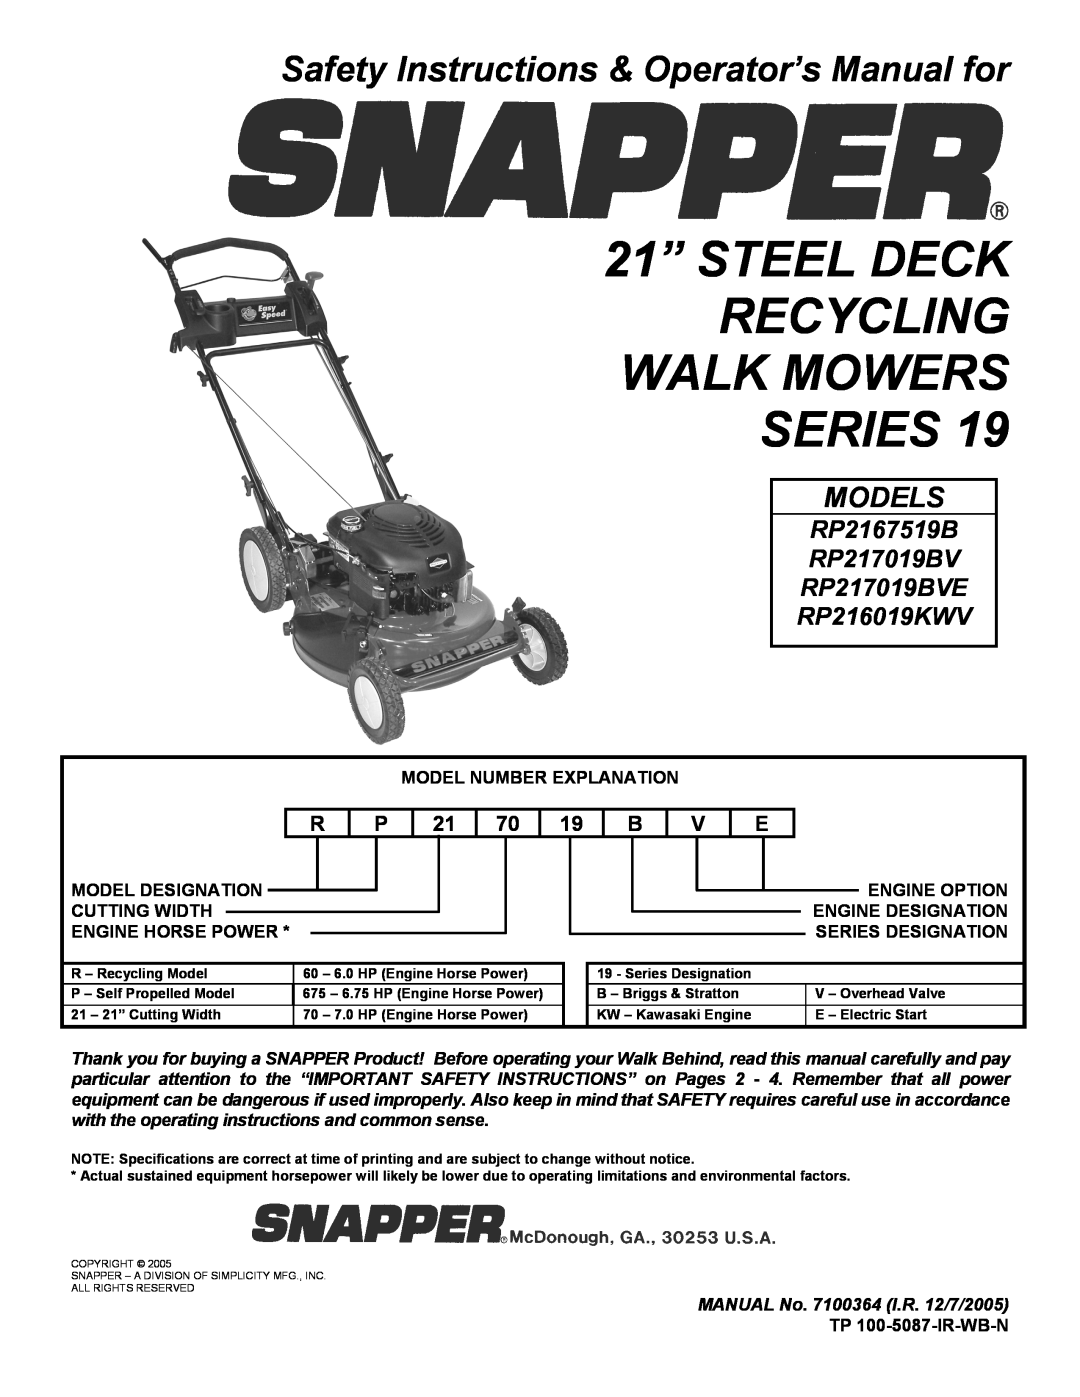 Snapper RP217019BVE, RP2167519B important safety instructions 21” STEEL DECK RECYCLING WALK MOWERS SERIES, Models 